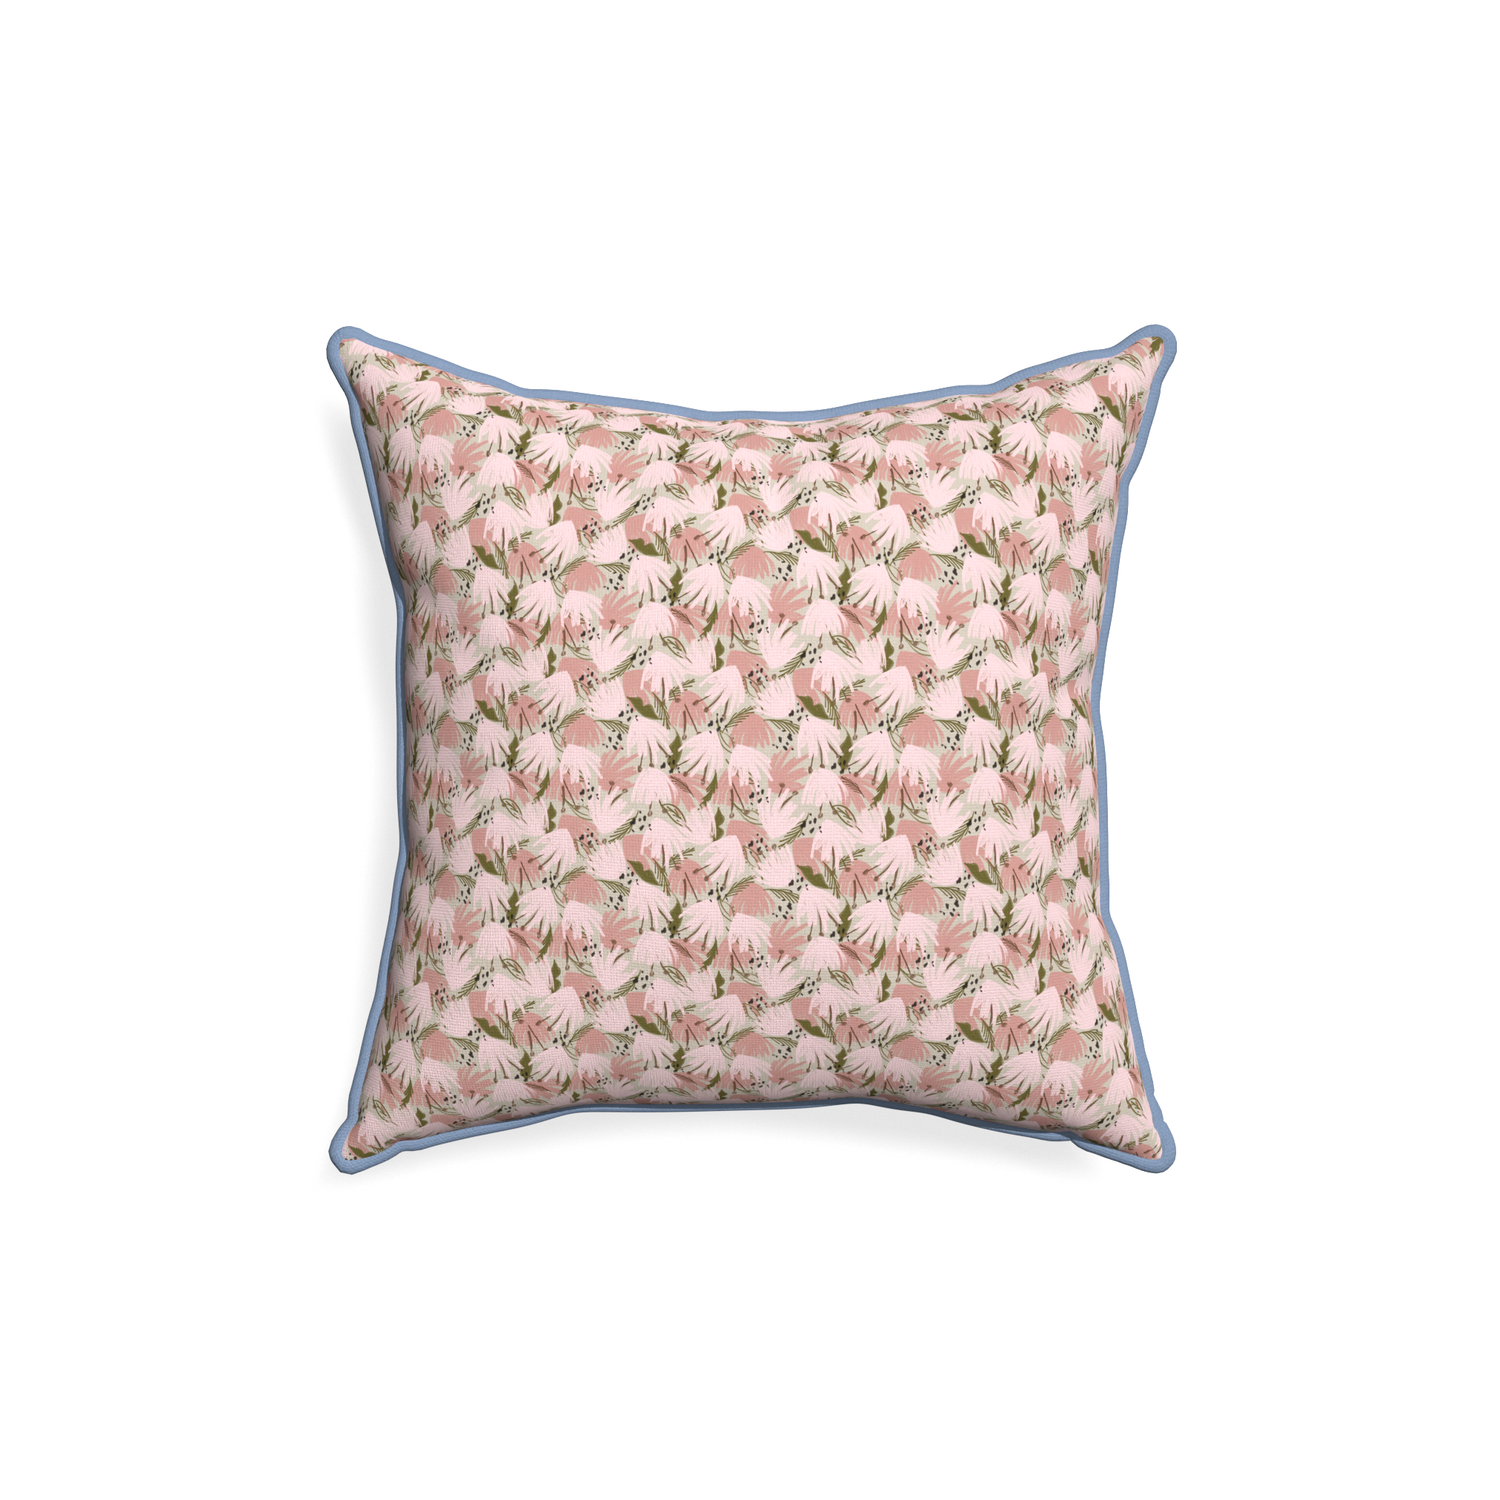 18-square eden pink custom pink floralpillow with sky piping on white background